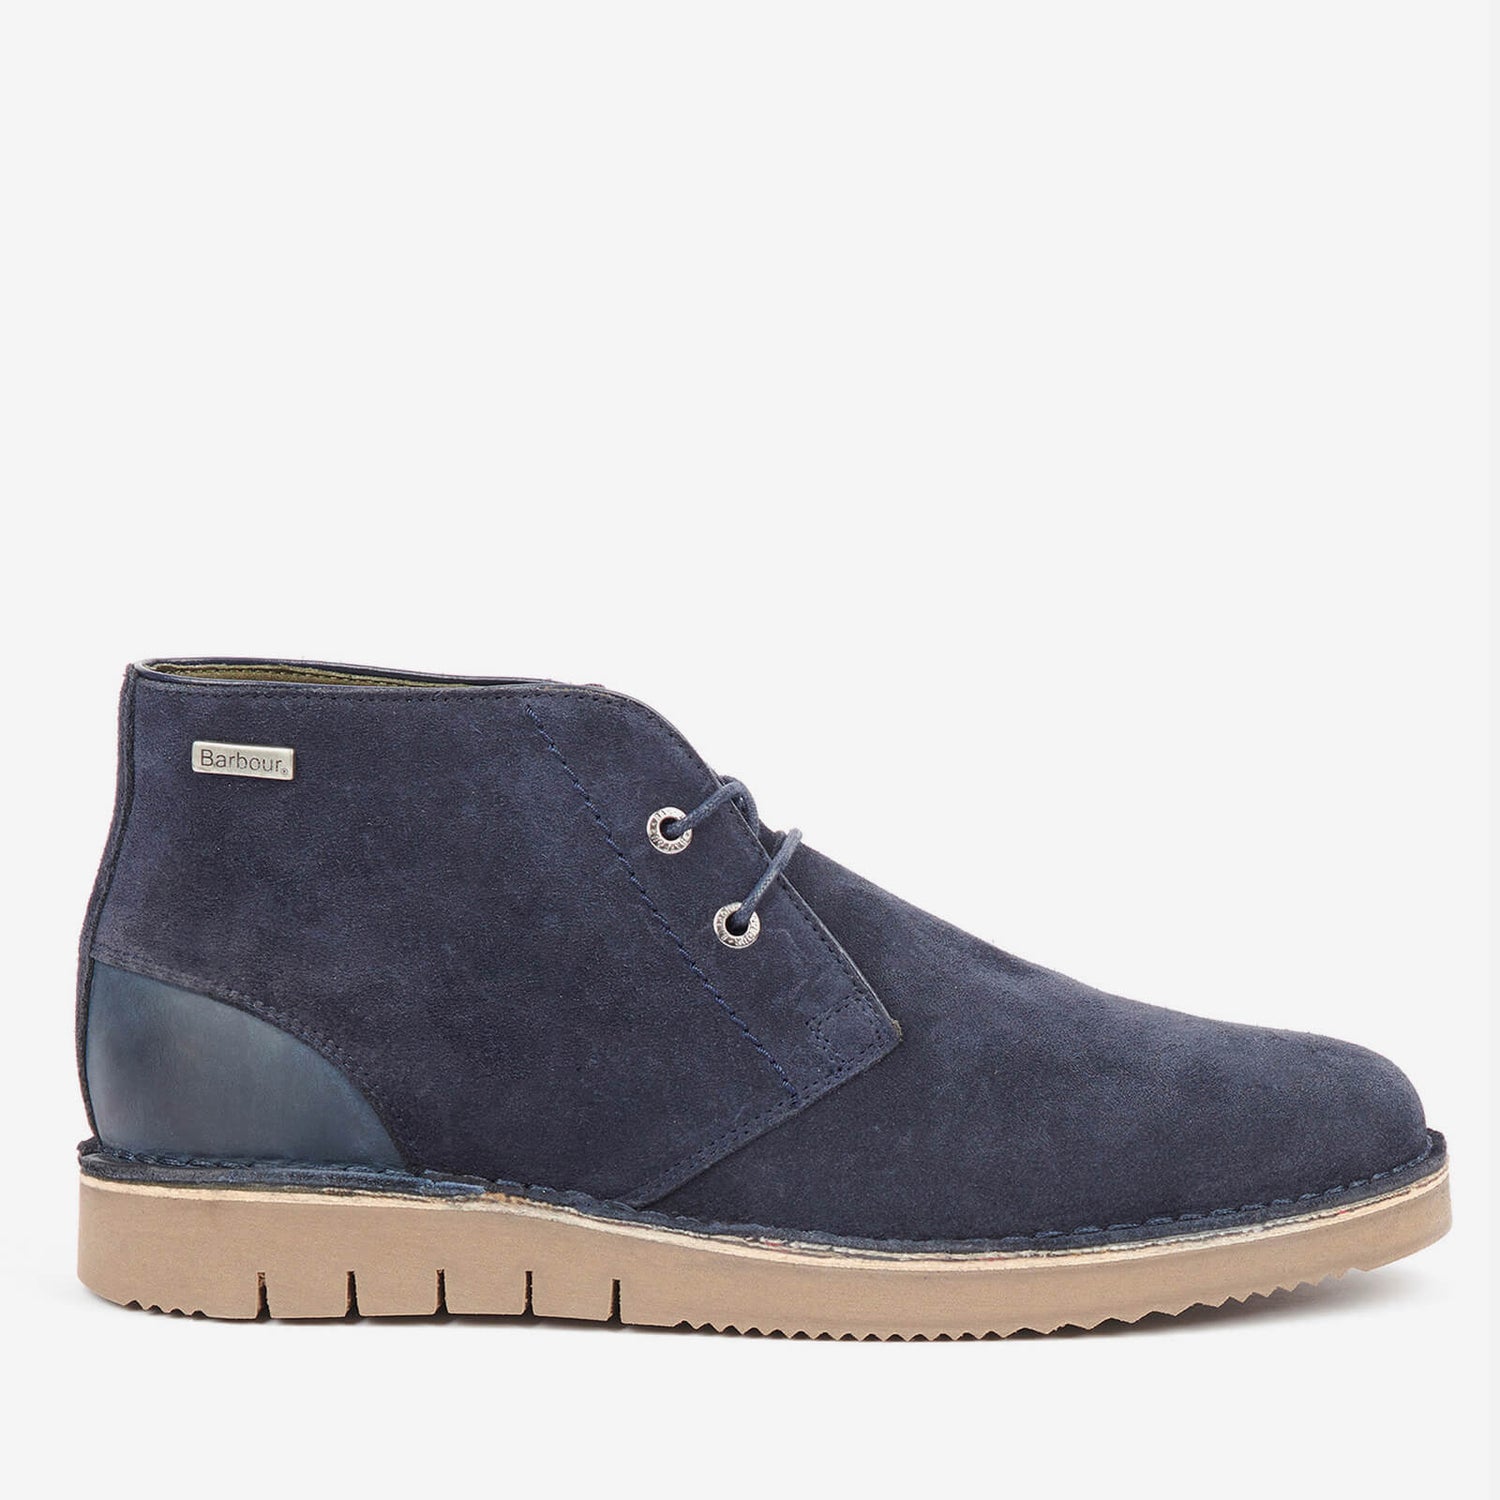 Barbour Kent Suede and Leather Chukka Boots